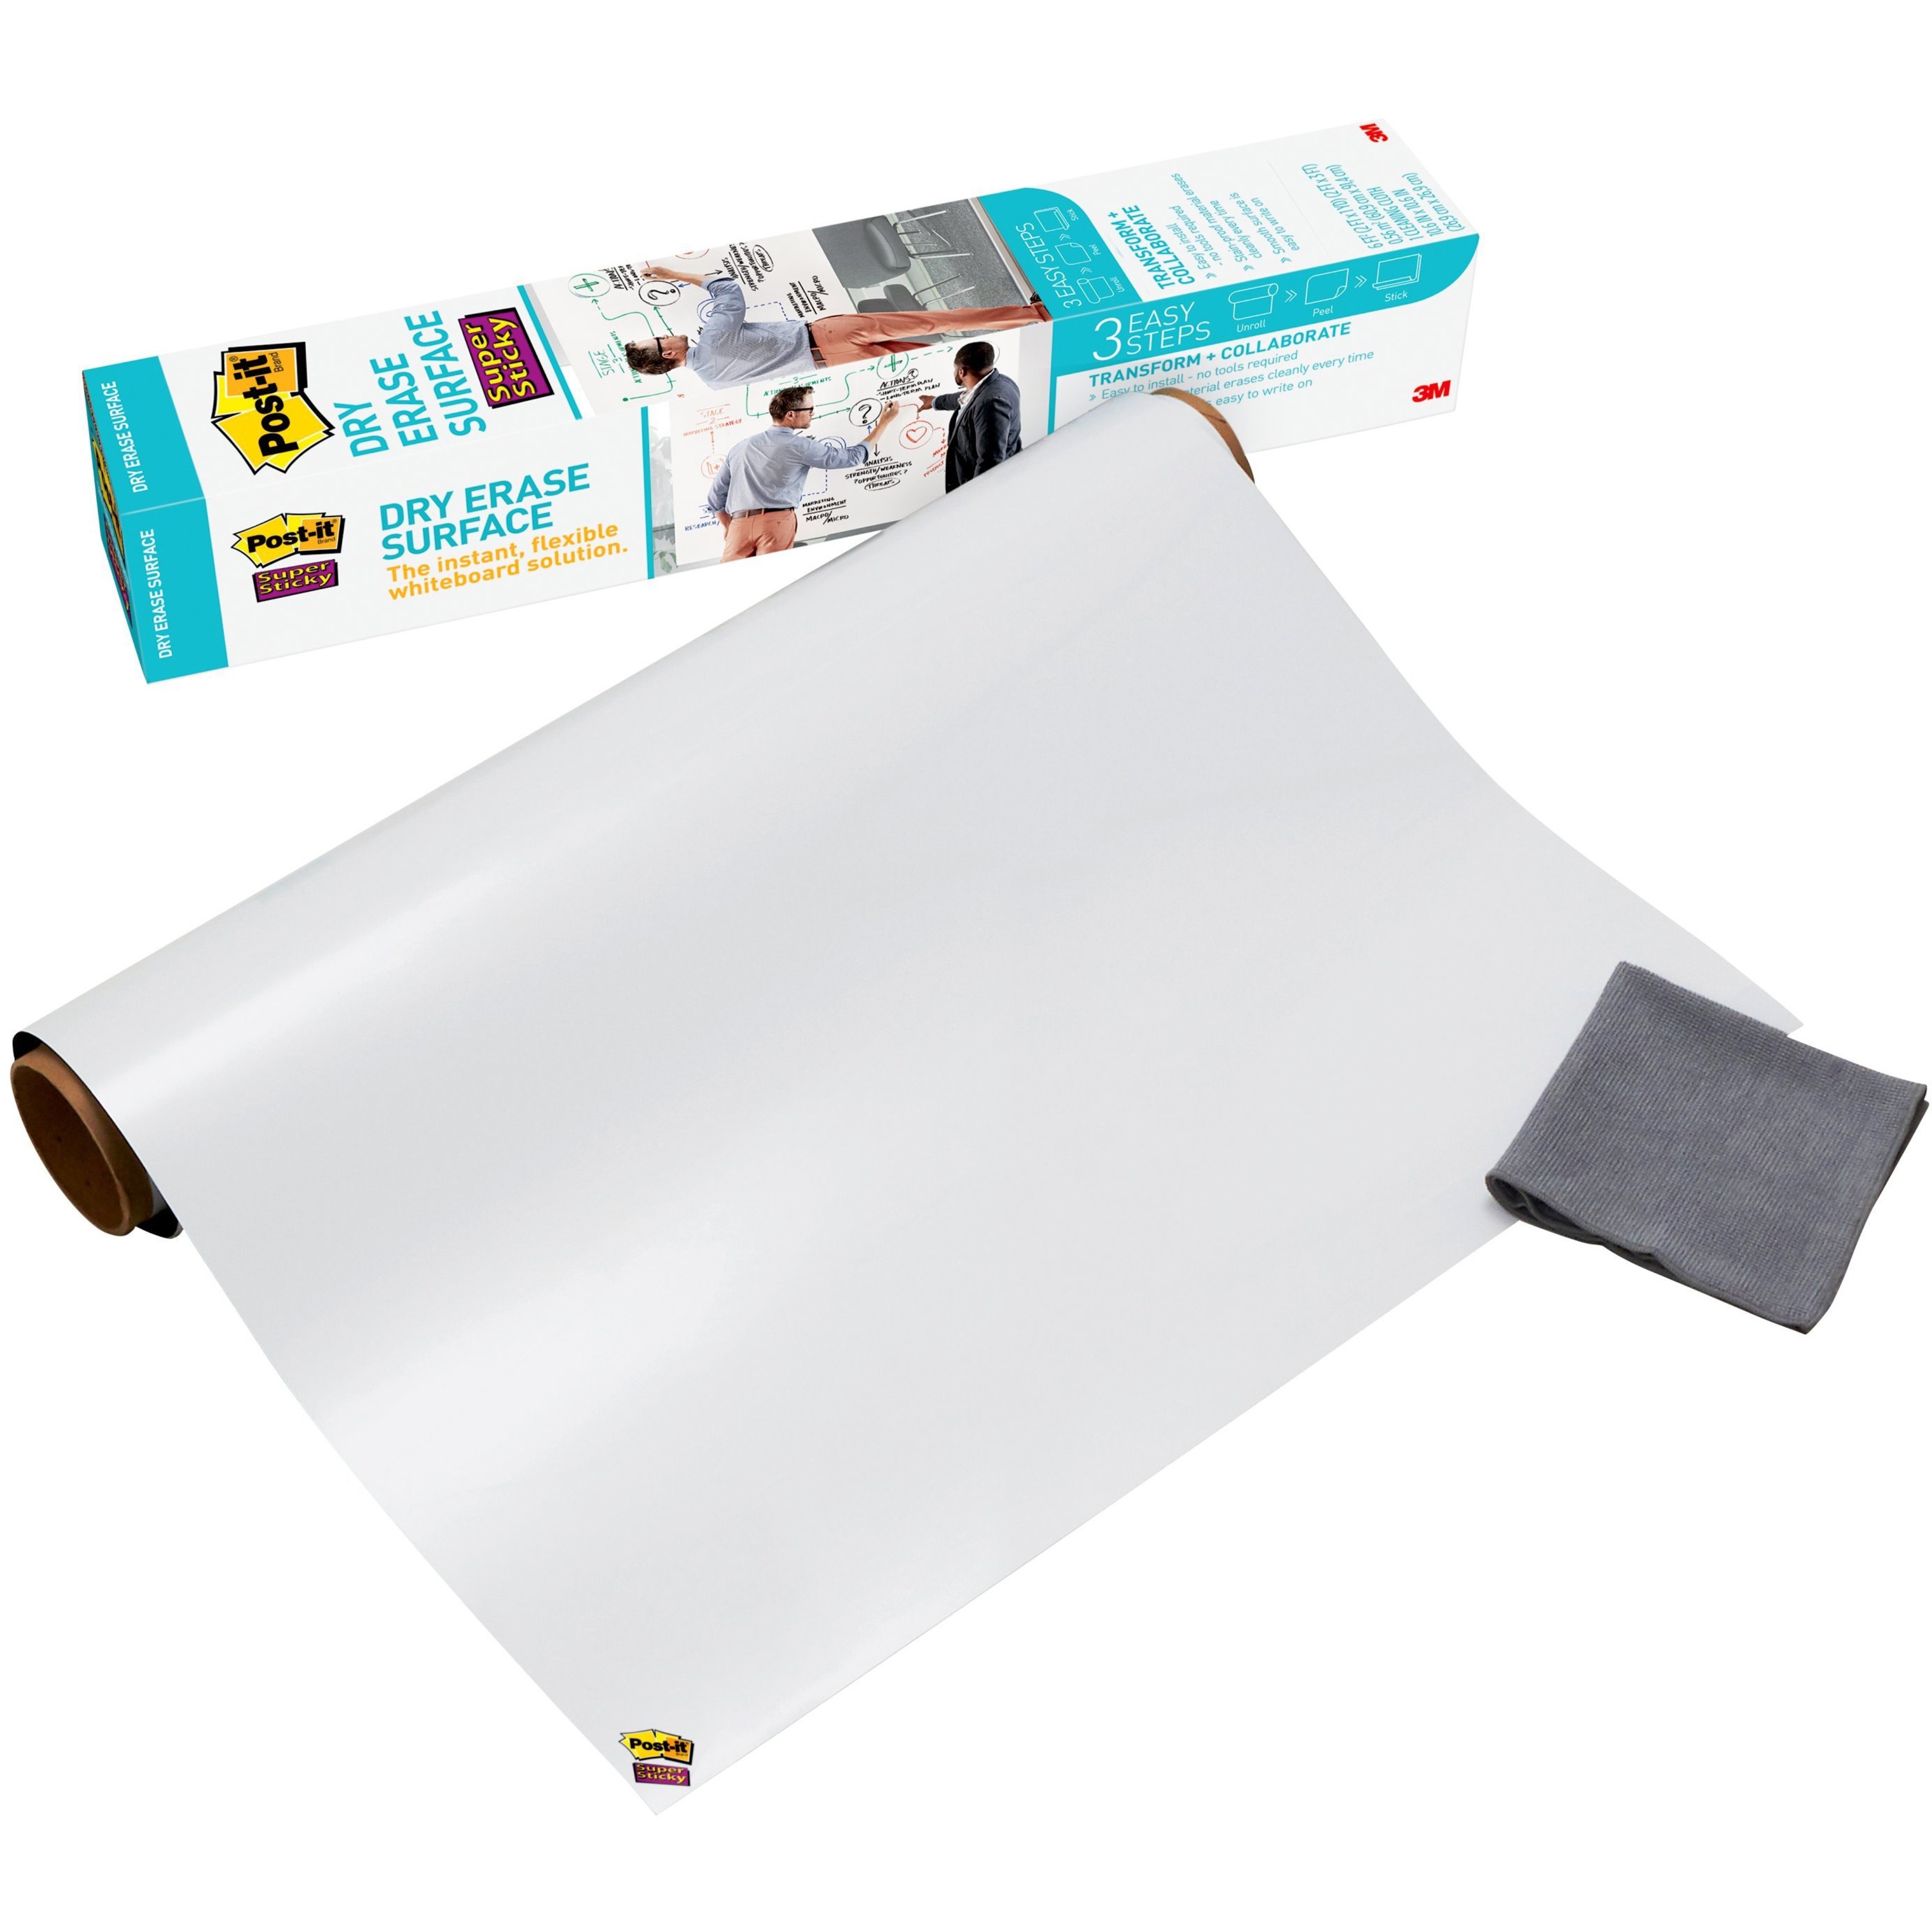 How To Buy Dry Erase Paint For A Whiteboard - COP Media Inc.